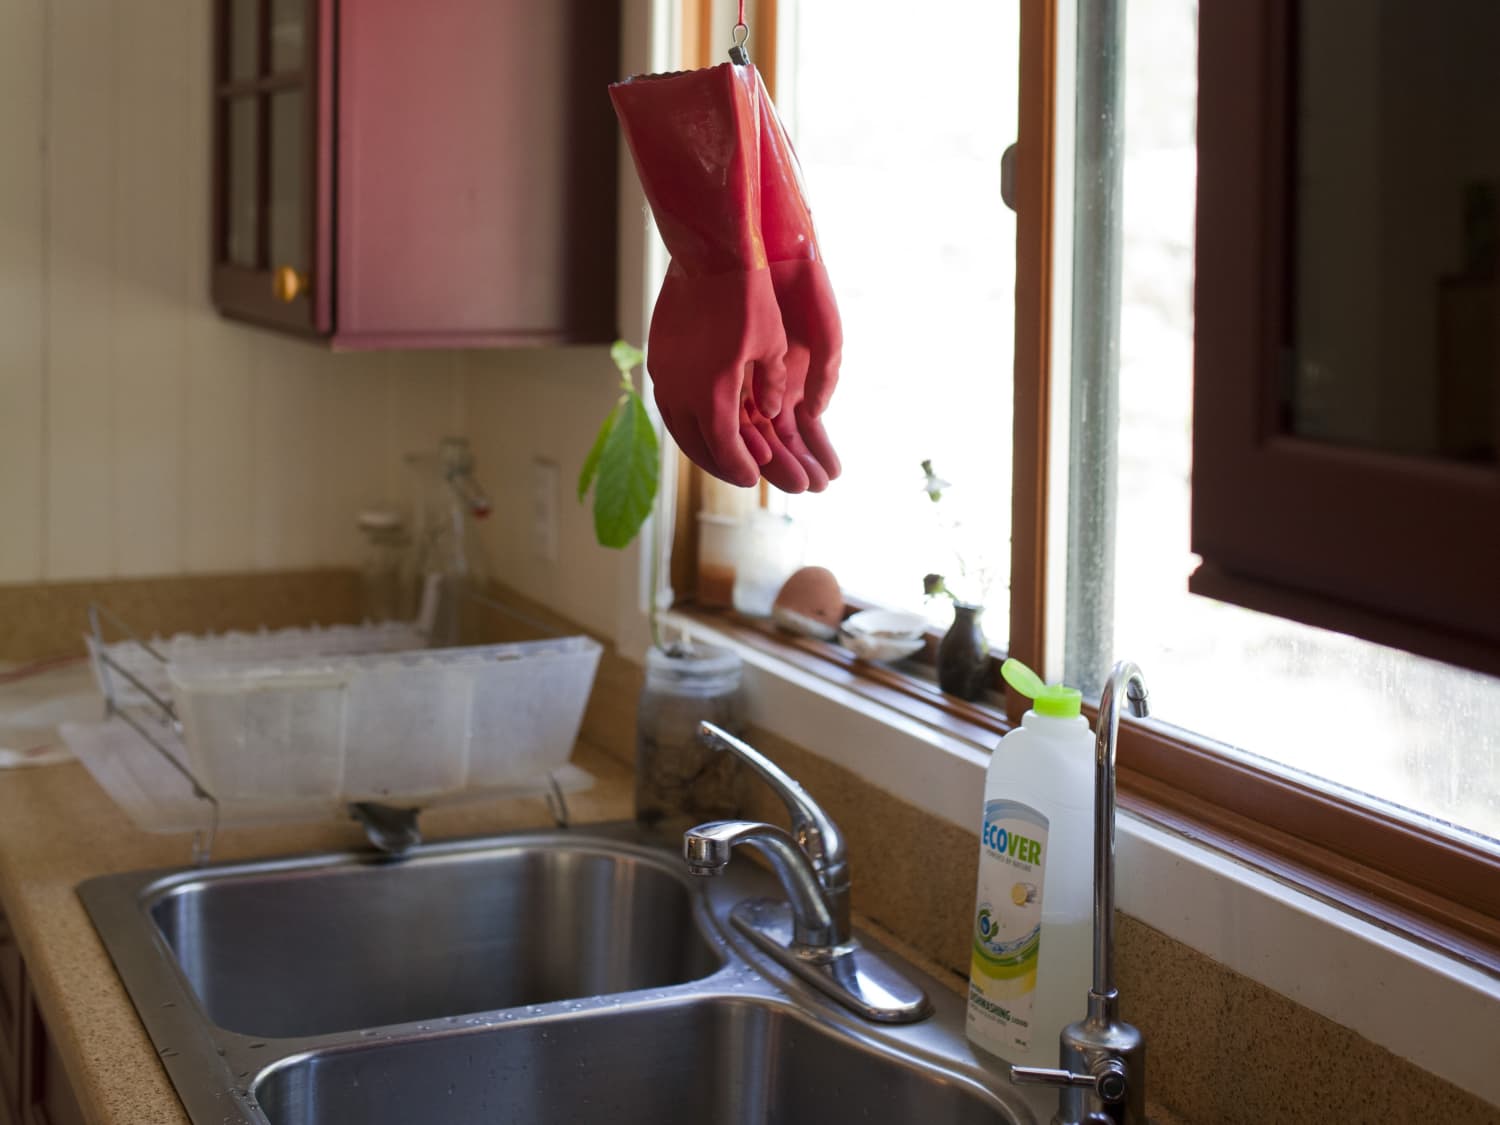 How To Store Dishwashing Gloves